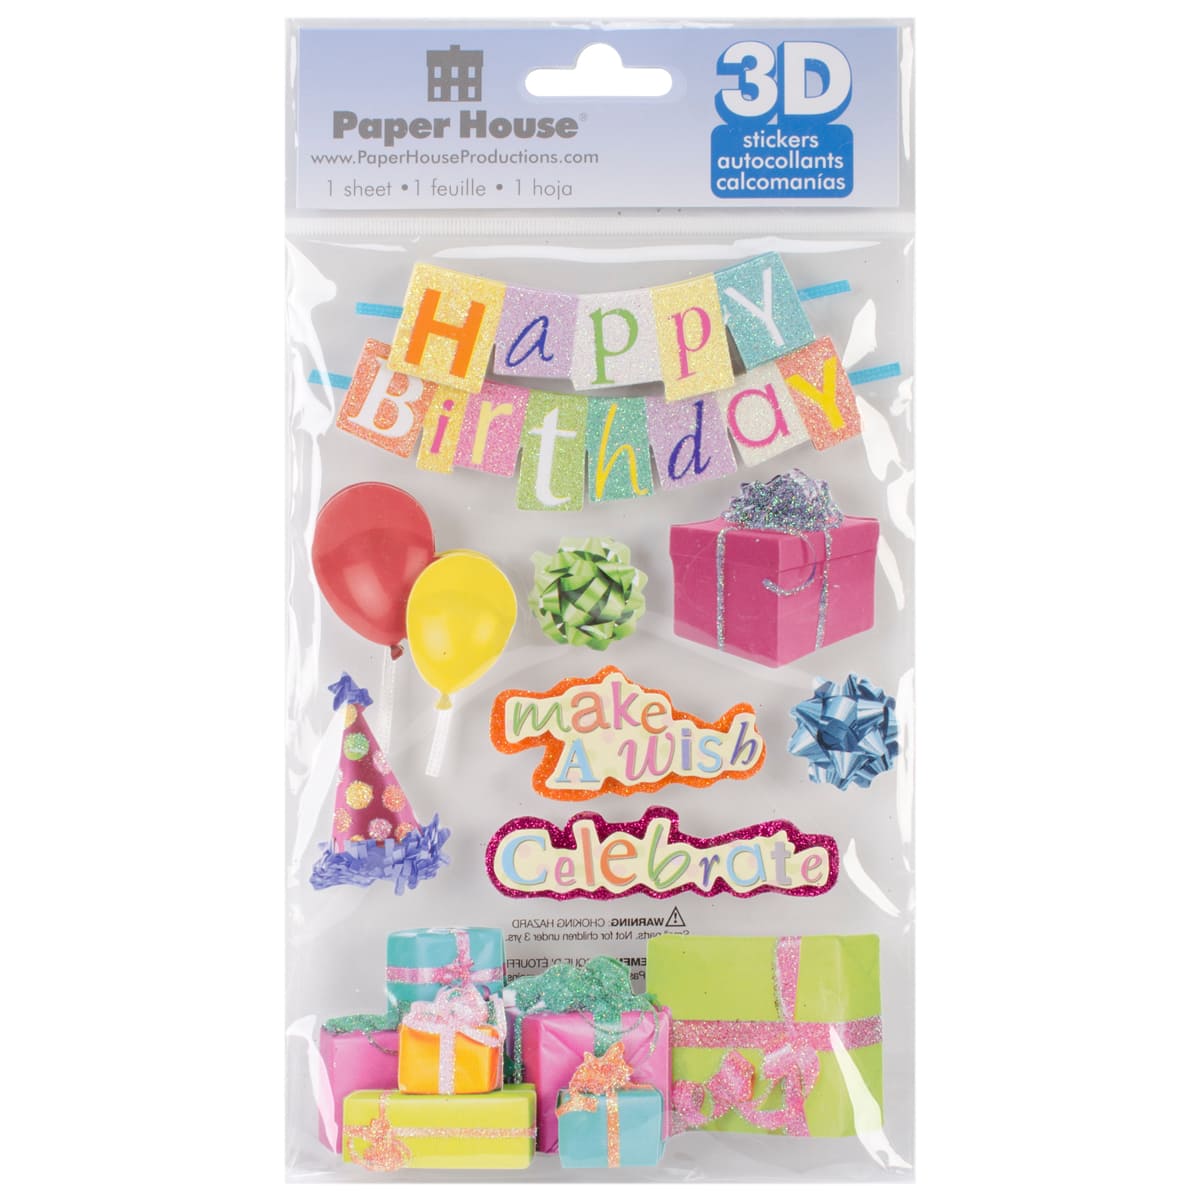 PAPER HOUSE HAPPY BIRTHDAY 3D STICKERS - Scrapbook Centrale